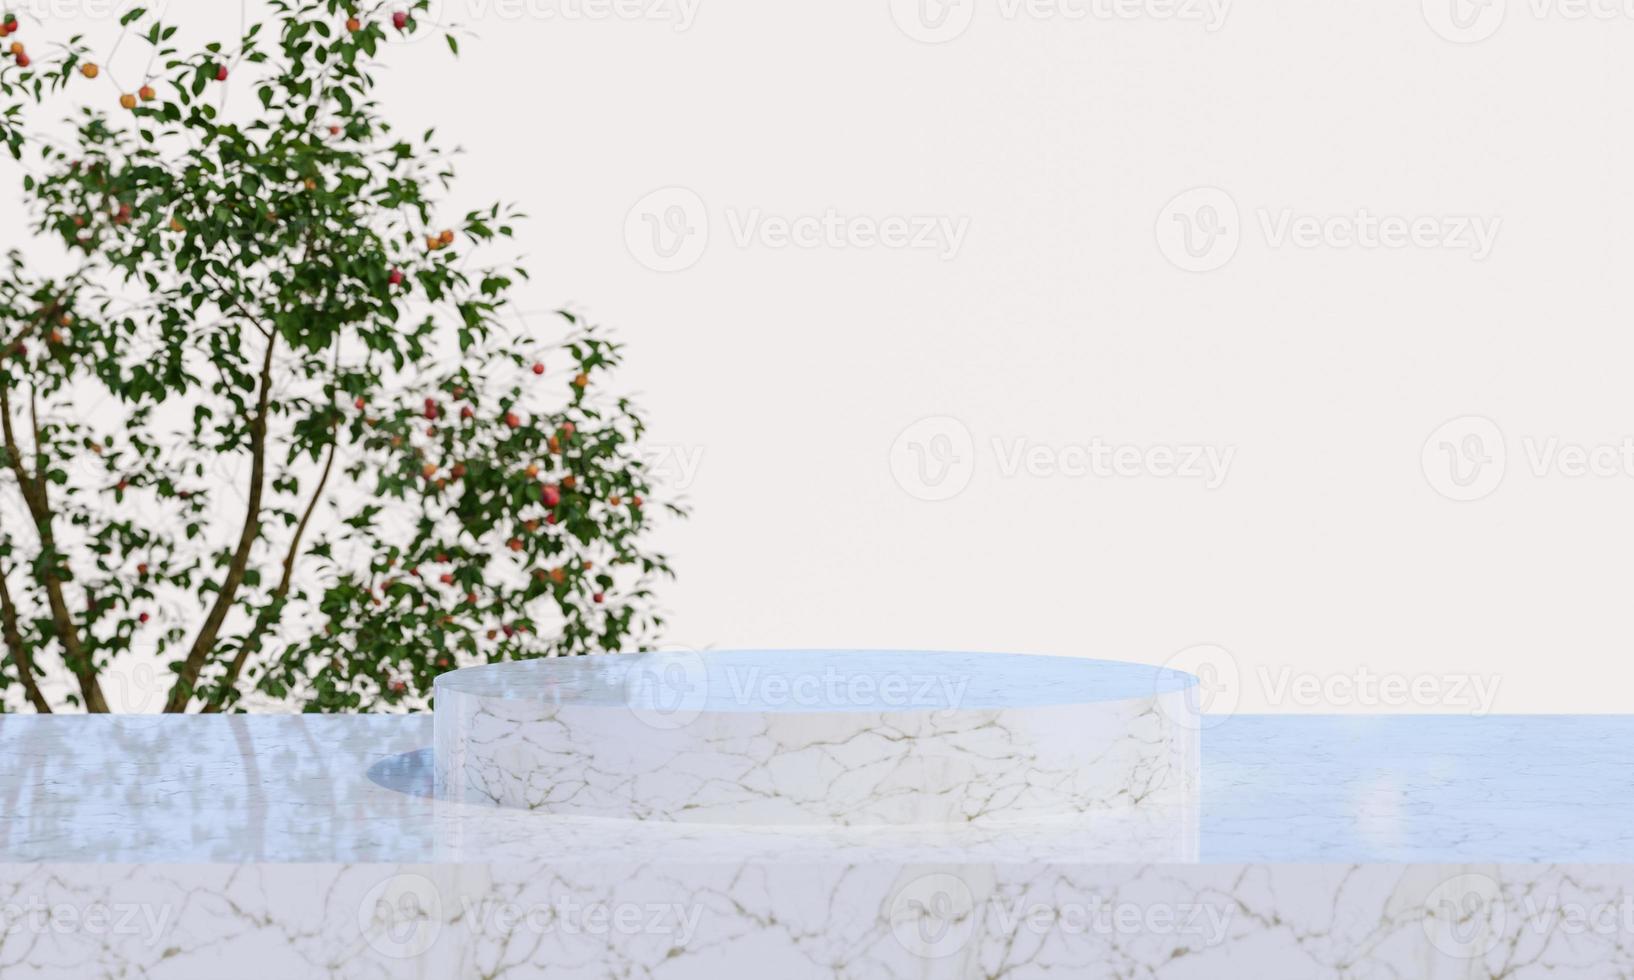 marble product display podium with blurred nature leaves background. 3D rendering photo